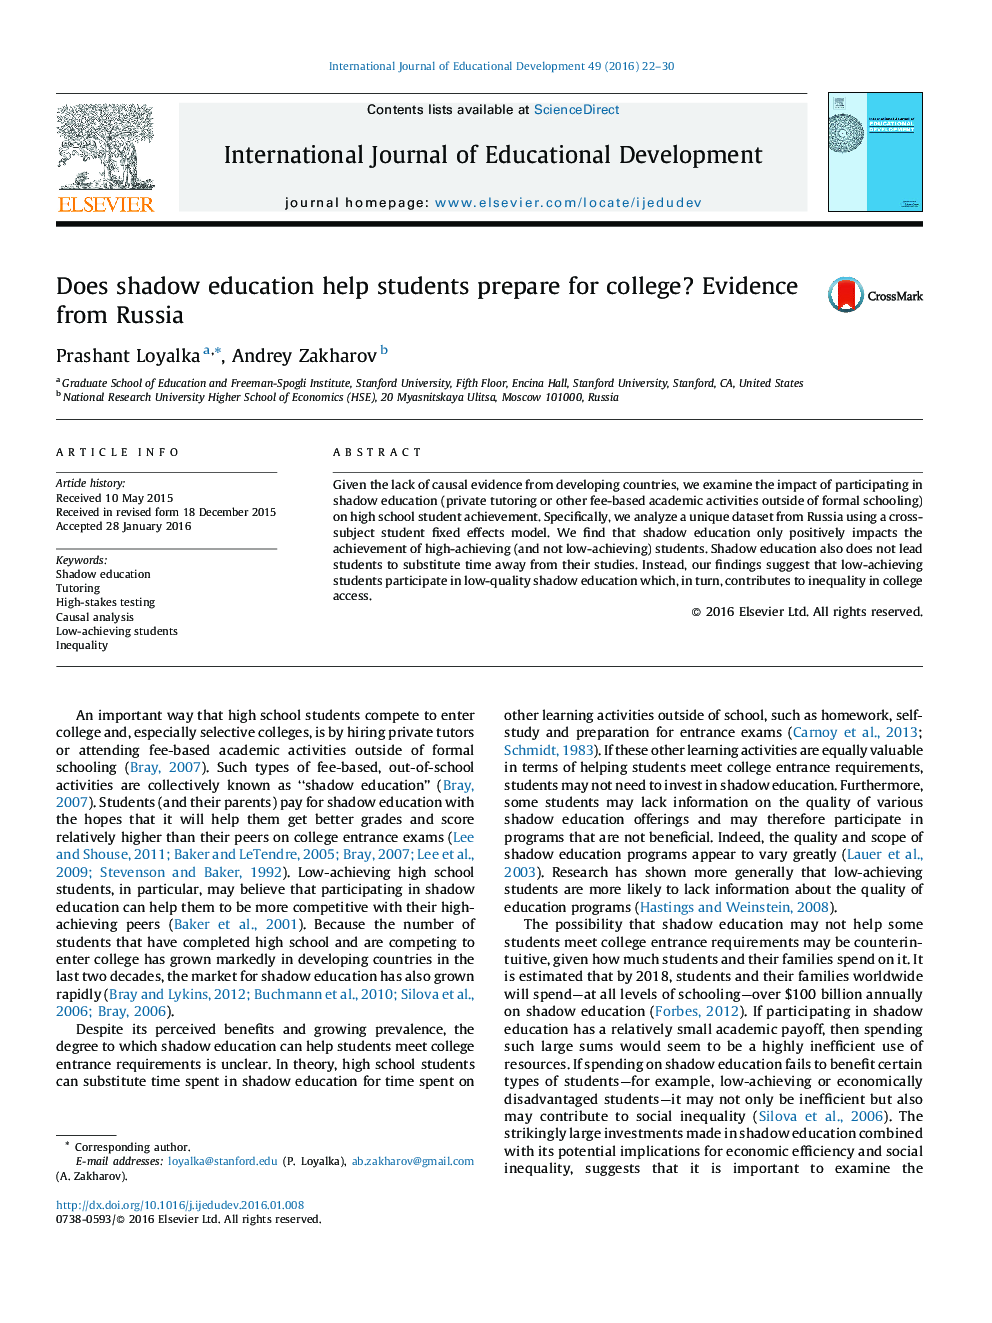 Does shadow education help students prepare for college? Evidence from Russia